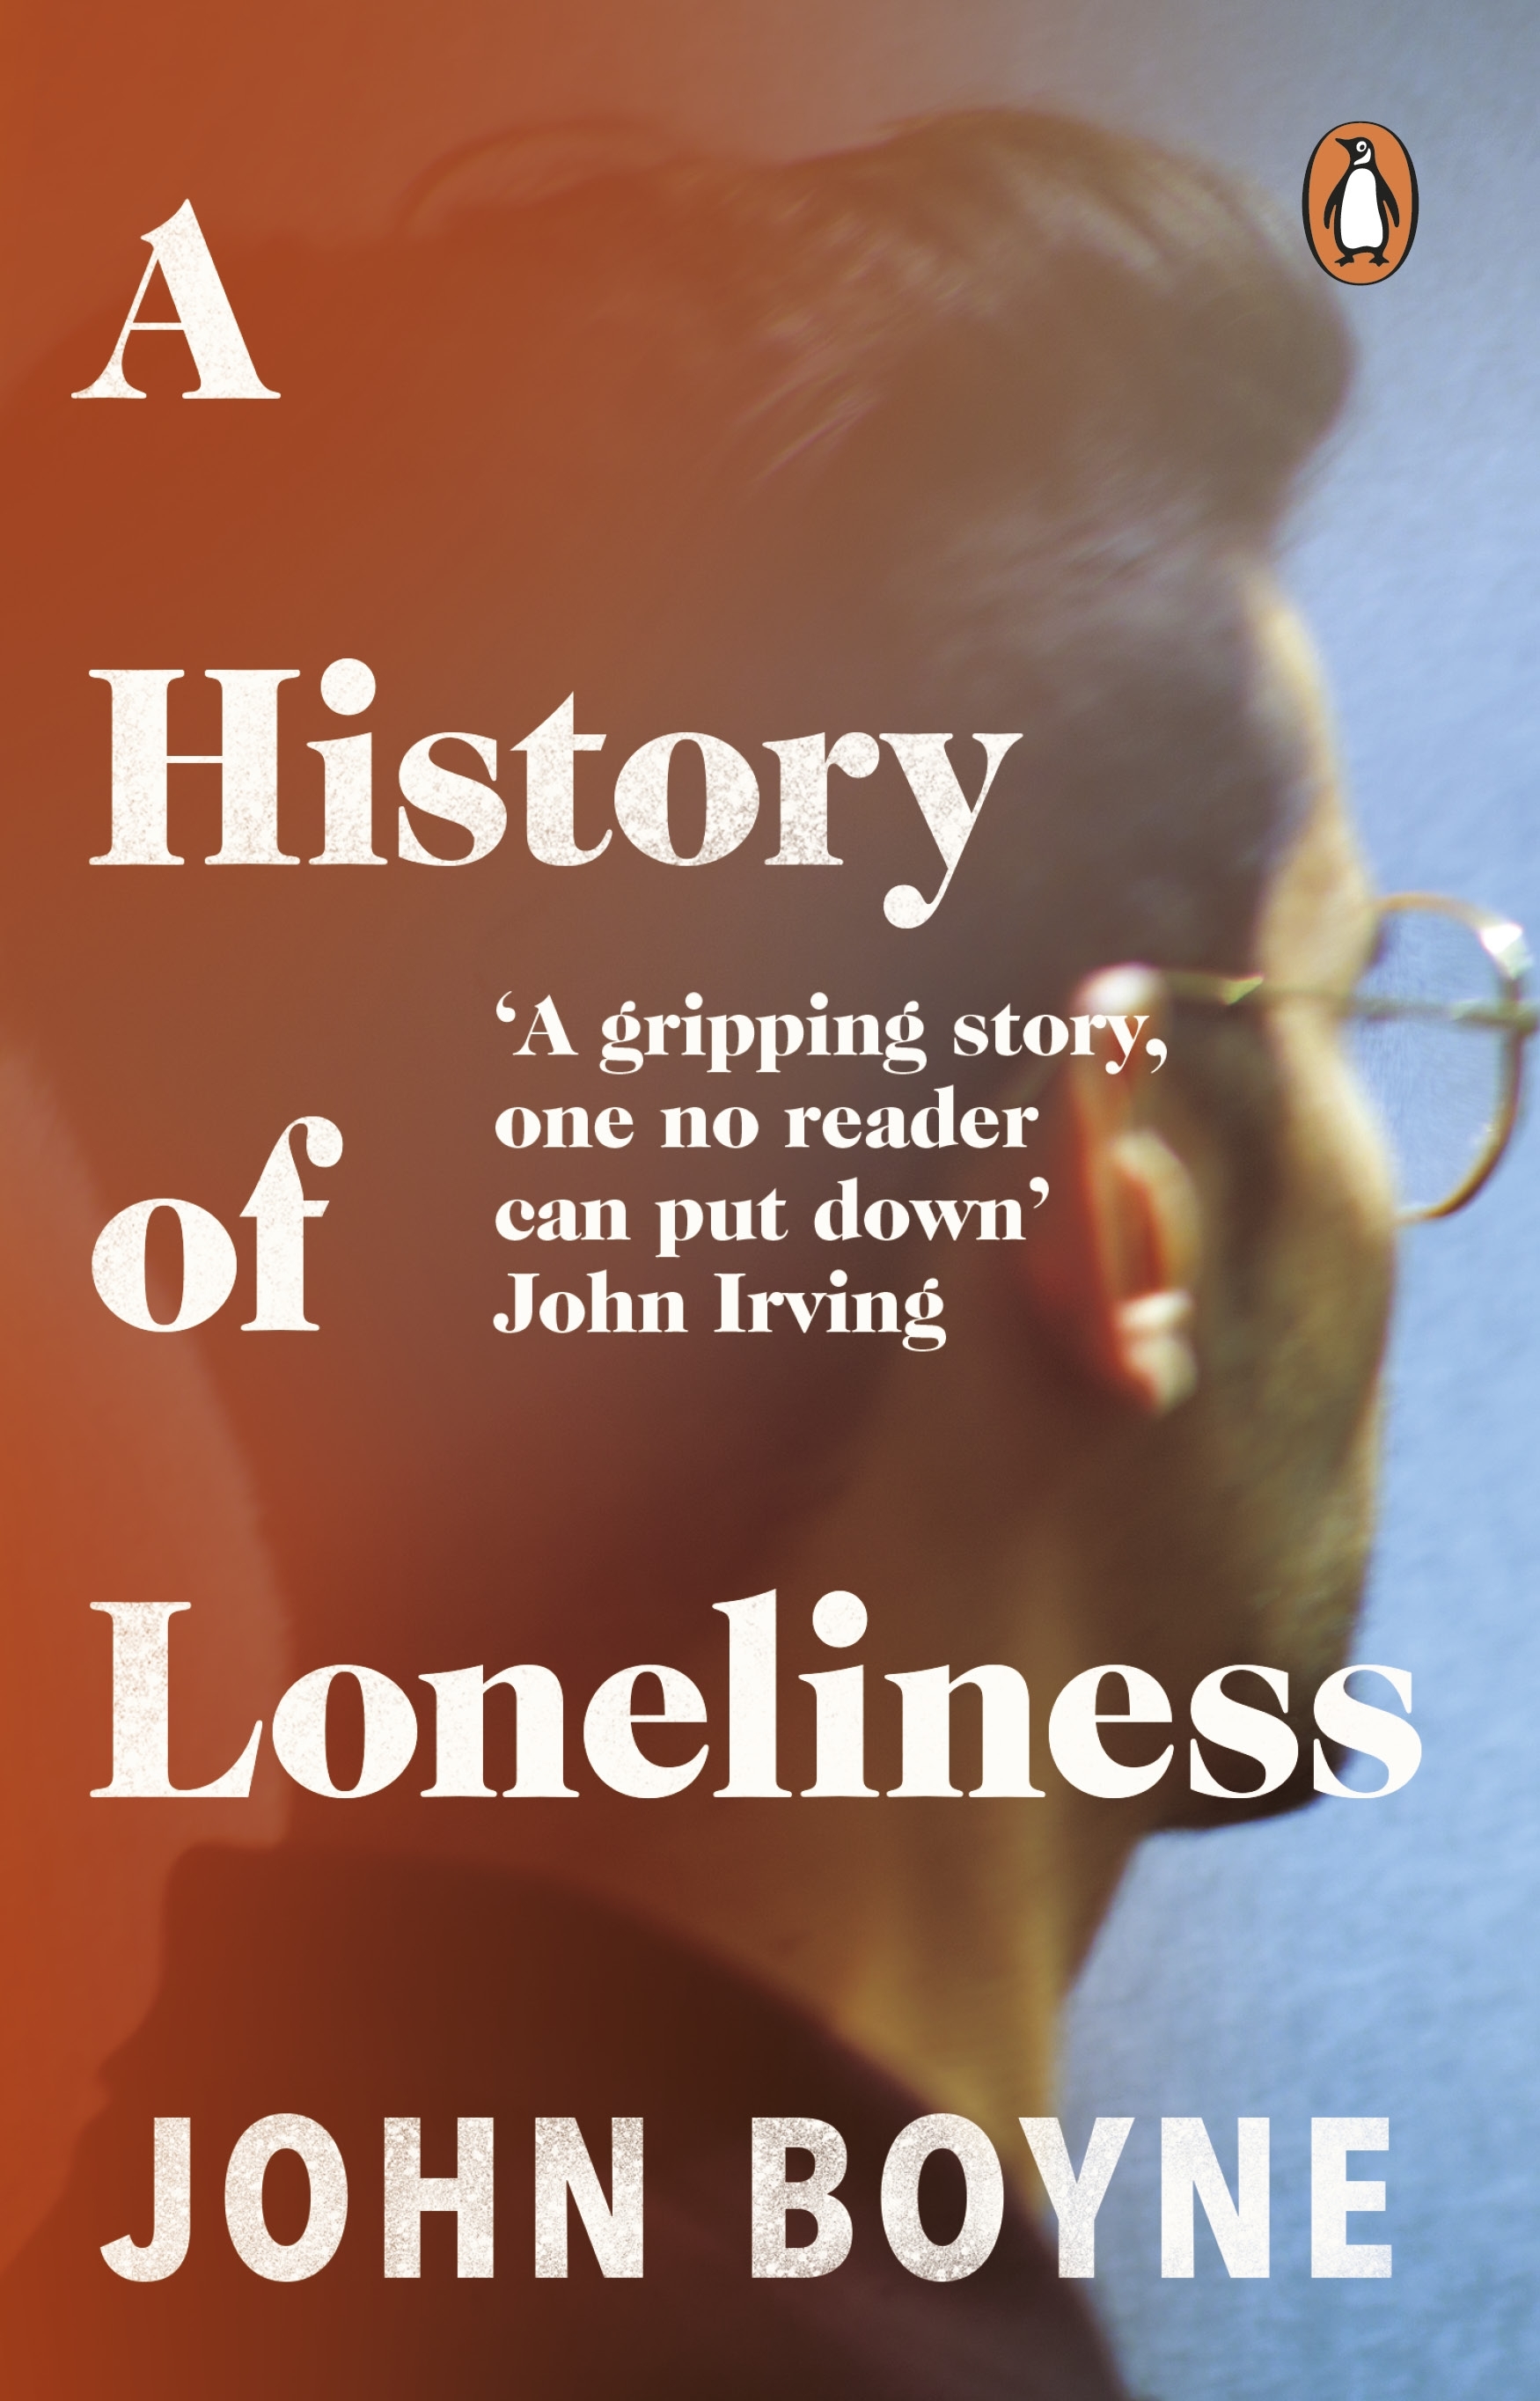 famous short story loneliness